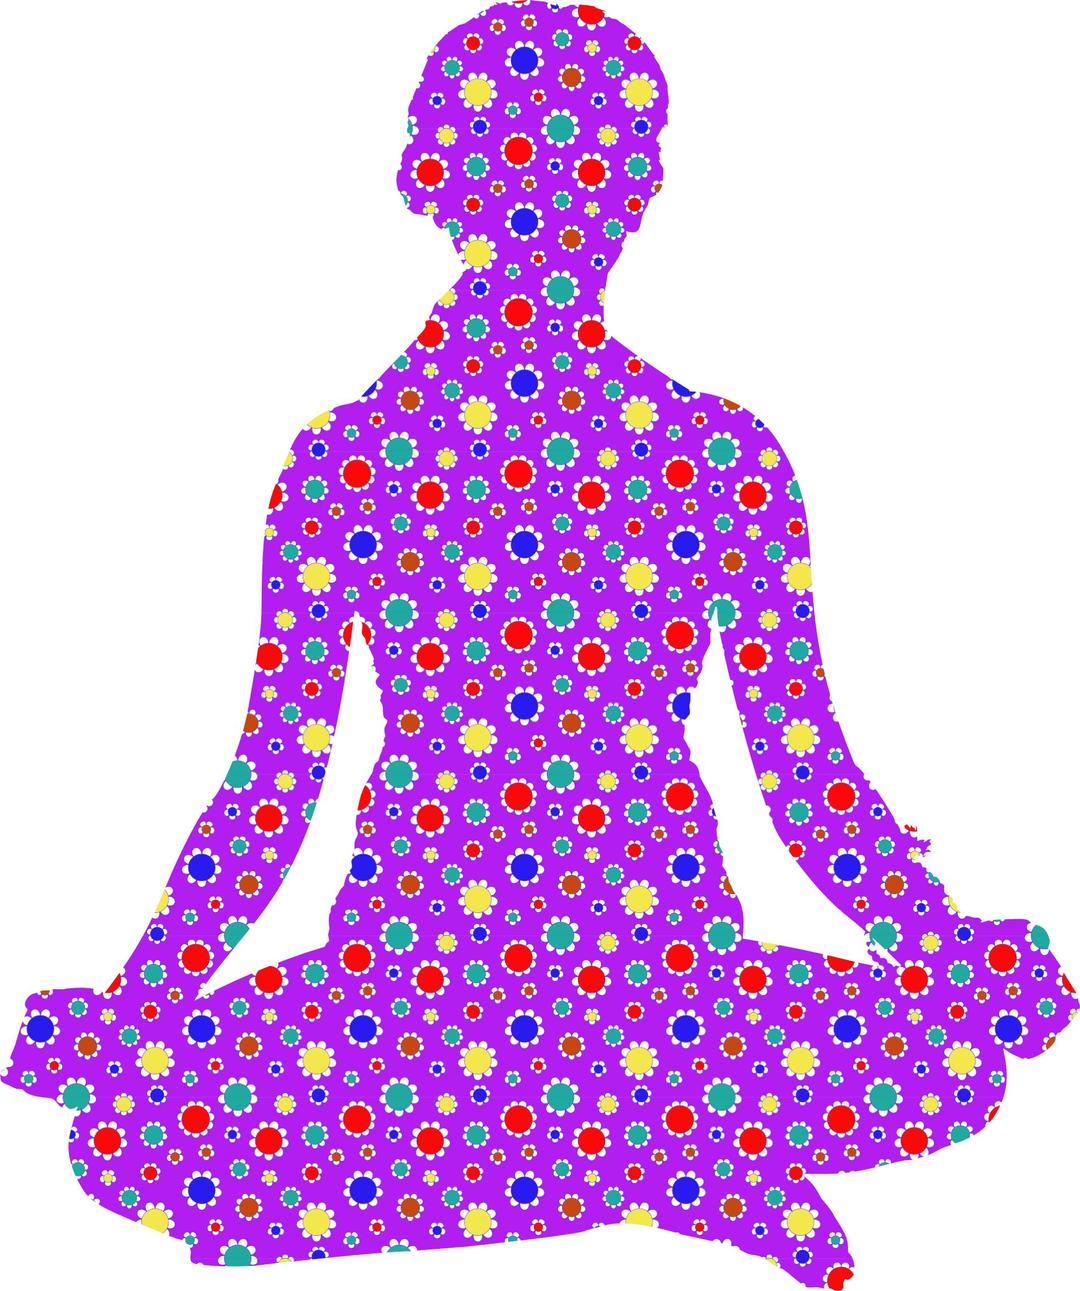 Cute Floral Female Yoga Pose Silhouette 7 Variation 2 png transparent